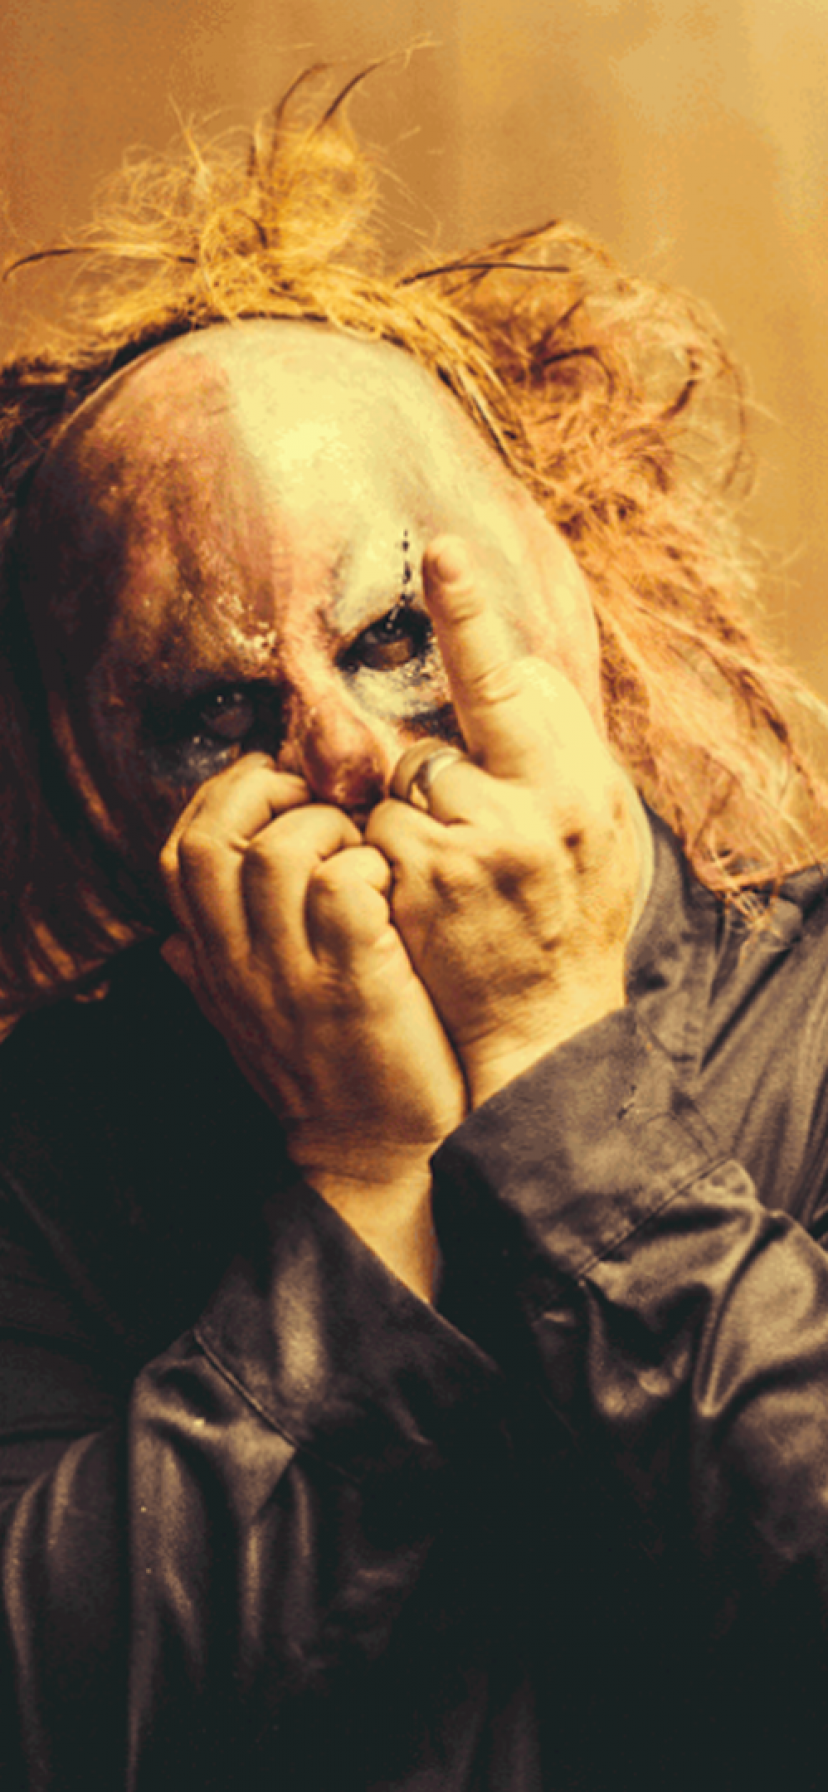 Iphone Xr Slipknot Wallpaper - Shawn Crahan The Gray Chapter , HD Wallpaper & Backgrounds